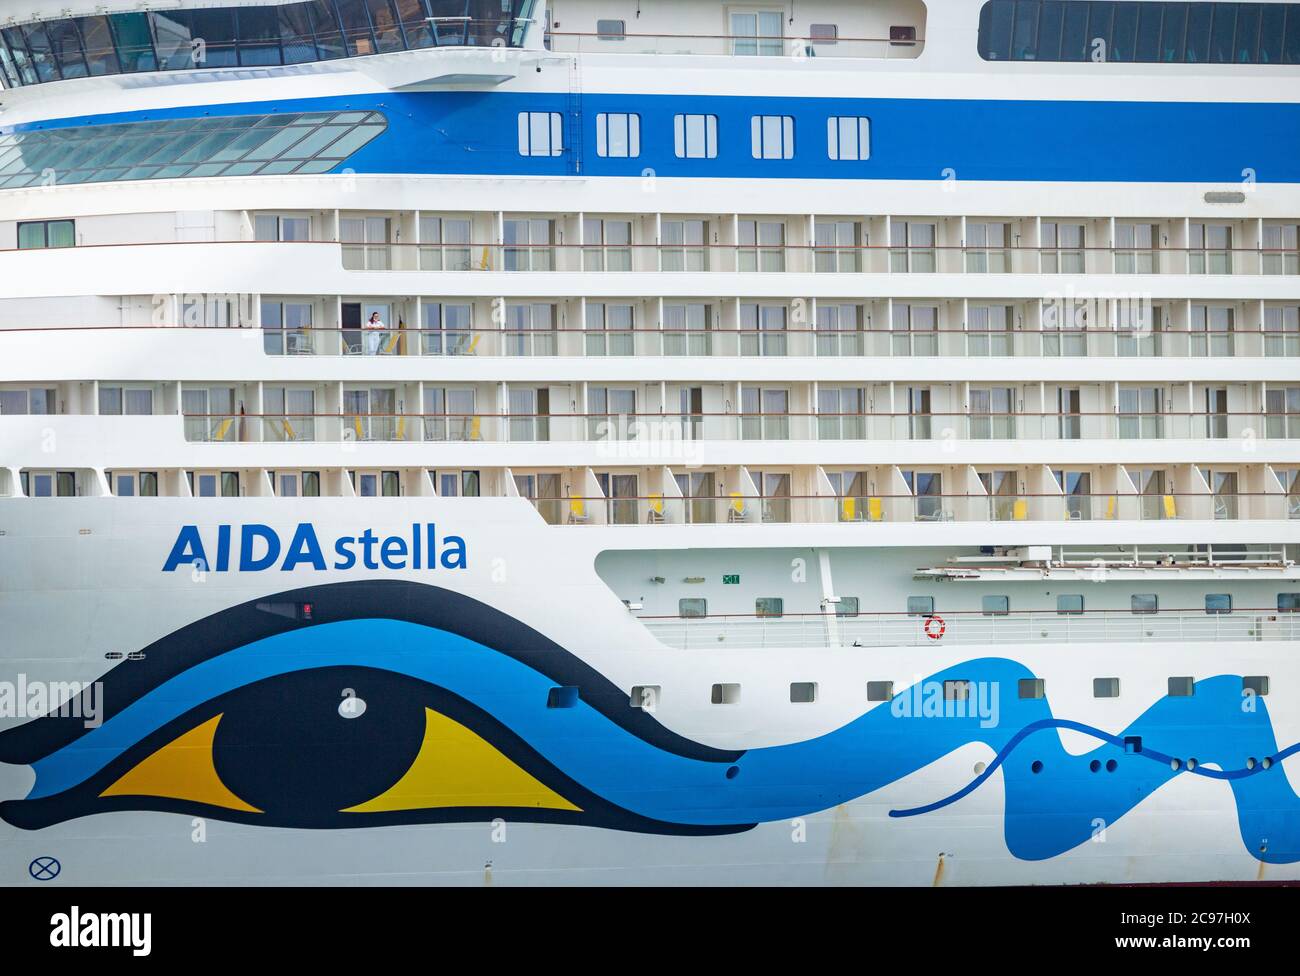 Las Palmas, Gran Canaria, Canary Islands, Spain. 29th July, 2020. A female member of the crew looks out from a cabin of Cruise ship Aida Stella as it docks in Las Palmas on Gran Canaria to take on supplies.The ship, which has stayed anchored off Gran Canaria during the pandemic, has been laid up since the Covid 19 state of emergency in March. There are believed to be more than100,000 crew workers quarantined on cruise ships worldwide. Credit: Alan Dawson/Alamy Live News Stock Photo